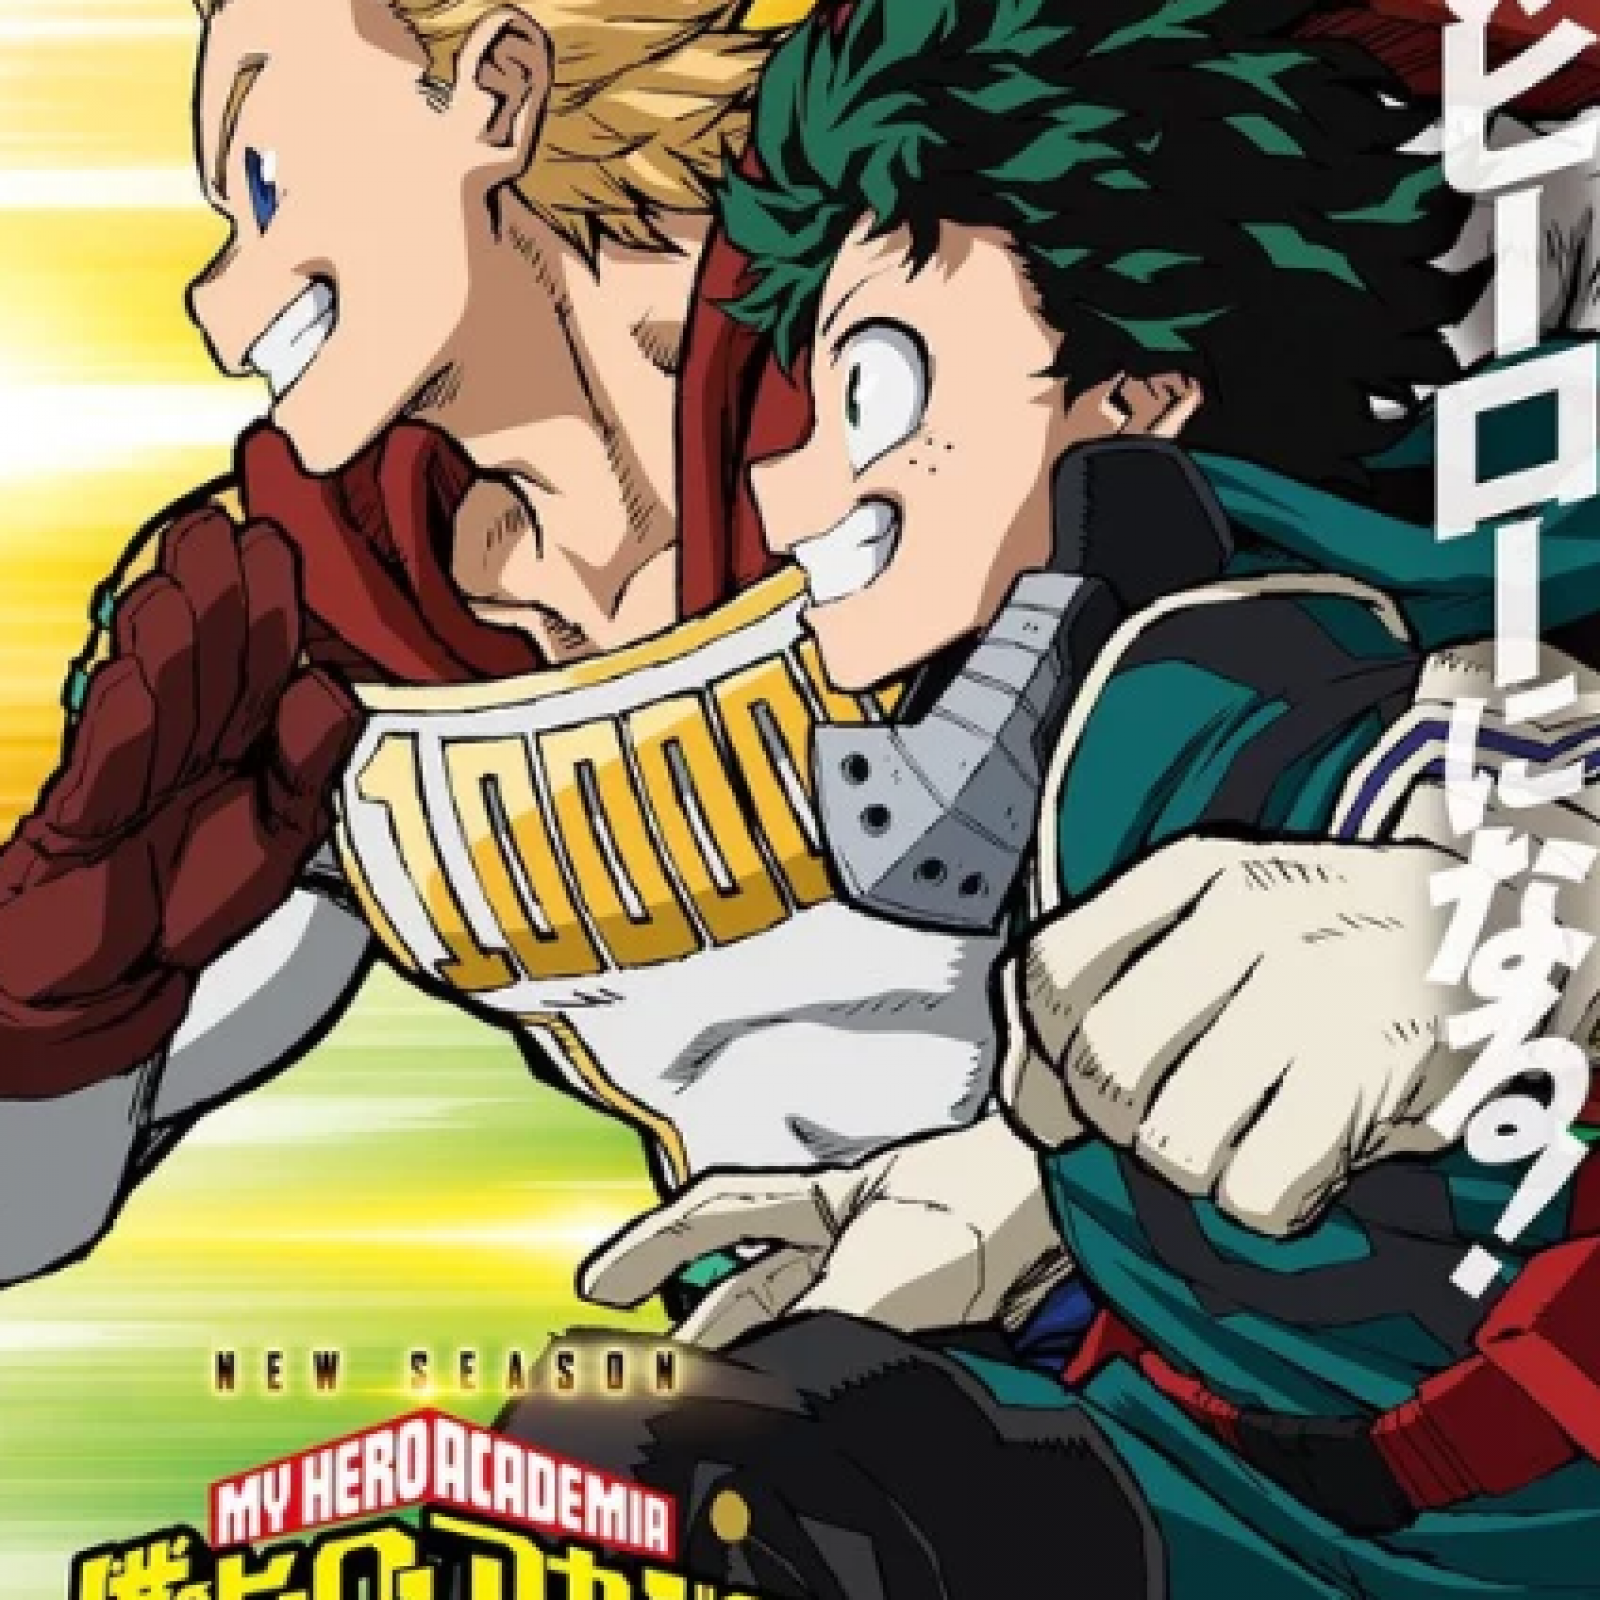 My Hero Academia Season 4 Release Date Confirmed For Fall 2019